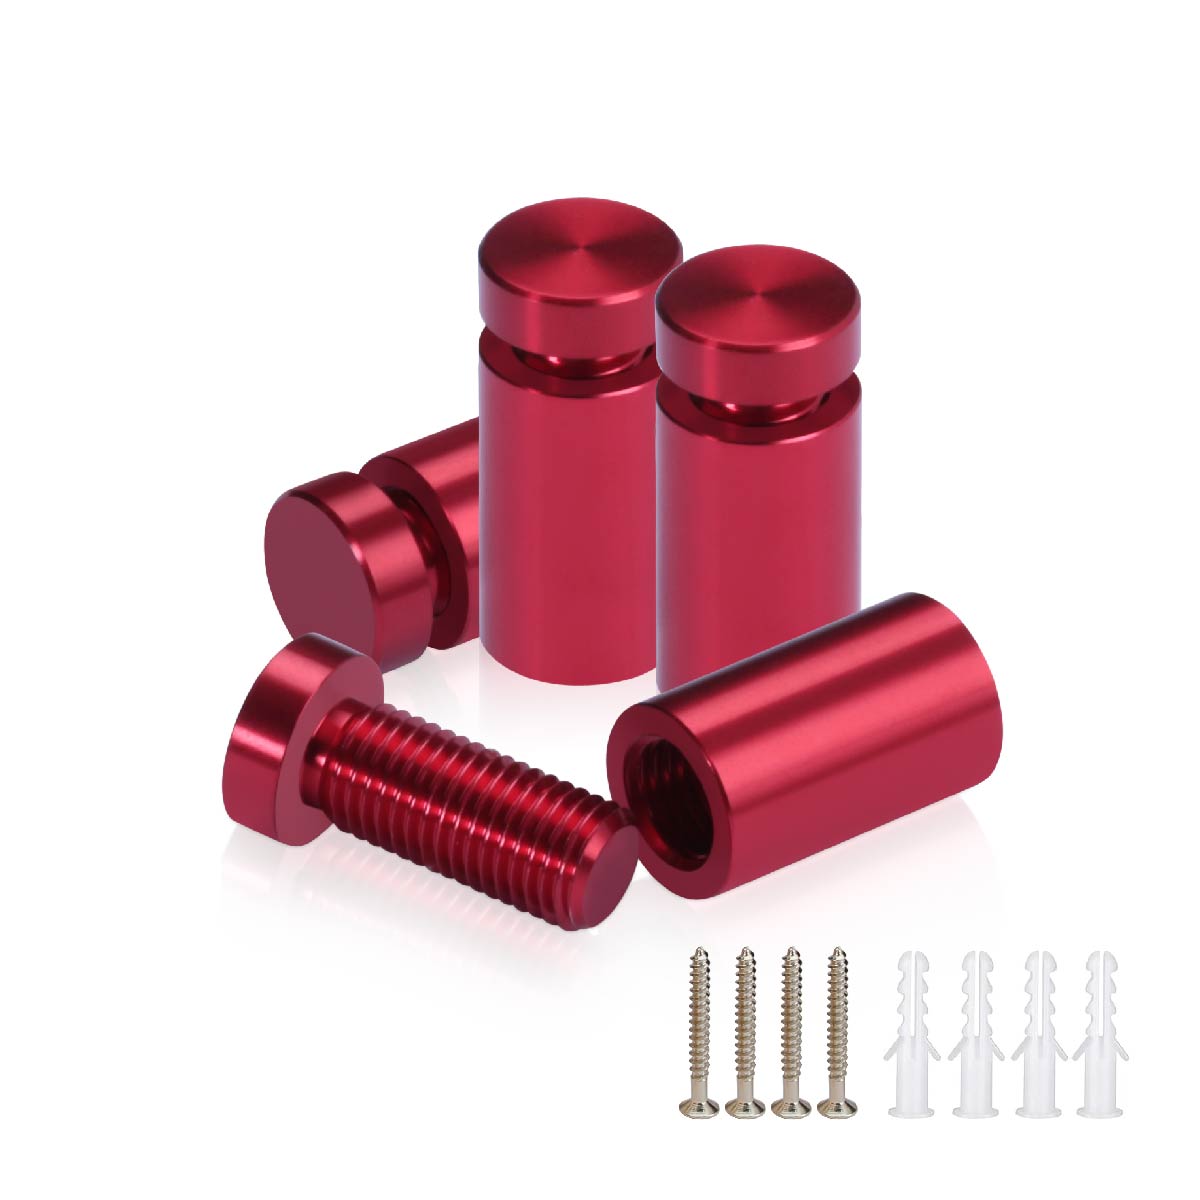 (Set of 4) 1/2'' Diameter X 3/4'' Barrel Length, Affordable Aluminum Standoffs, Cherry Red Anodized Finish Standoff and (4) 2208Z Screw and (4) LANC1 Anchor for concrete/drywall (For Inside/Outside) [Required Material Hole Size: 3/8'']